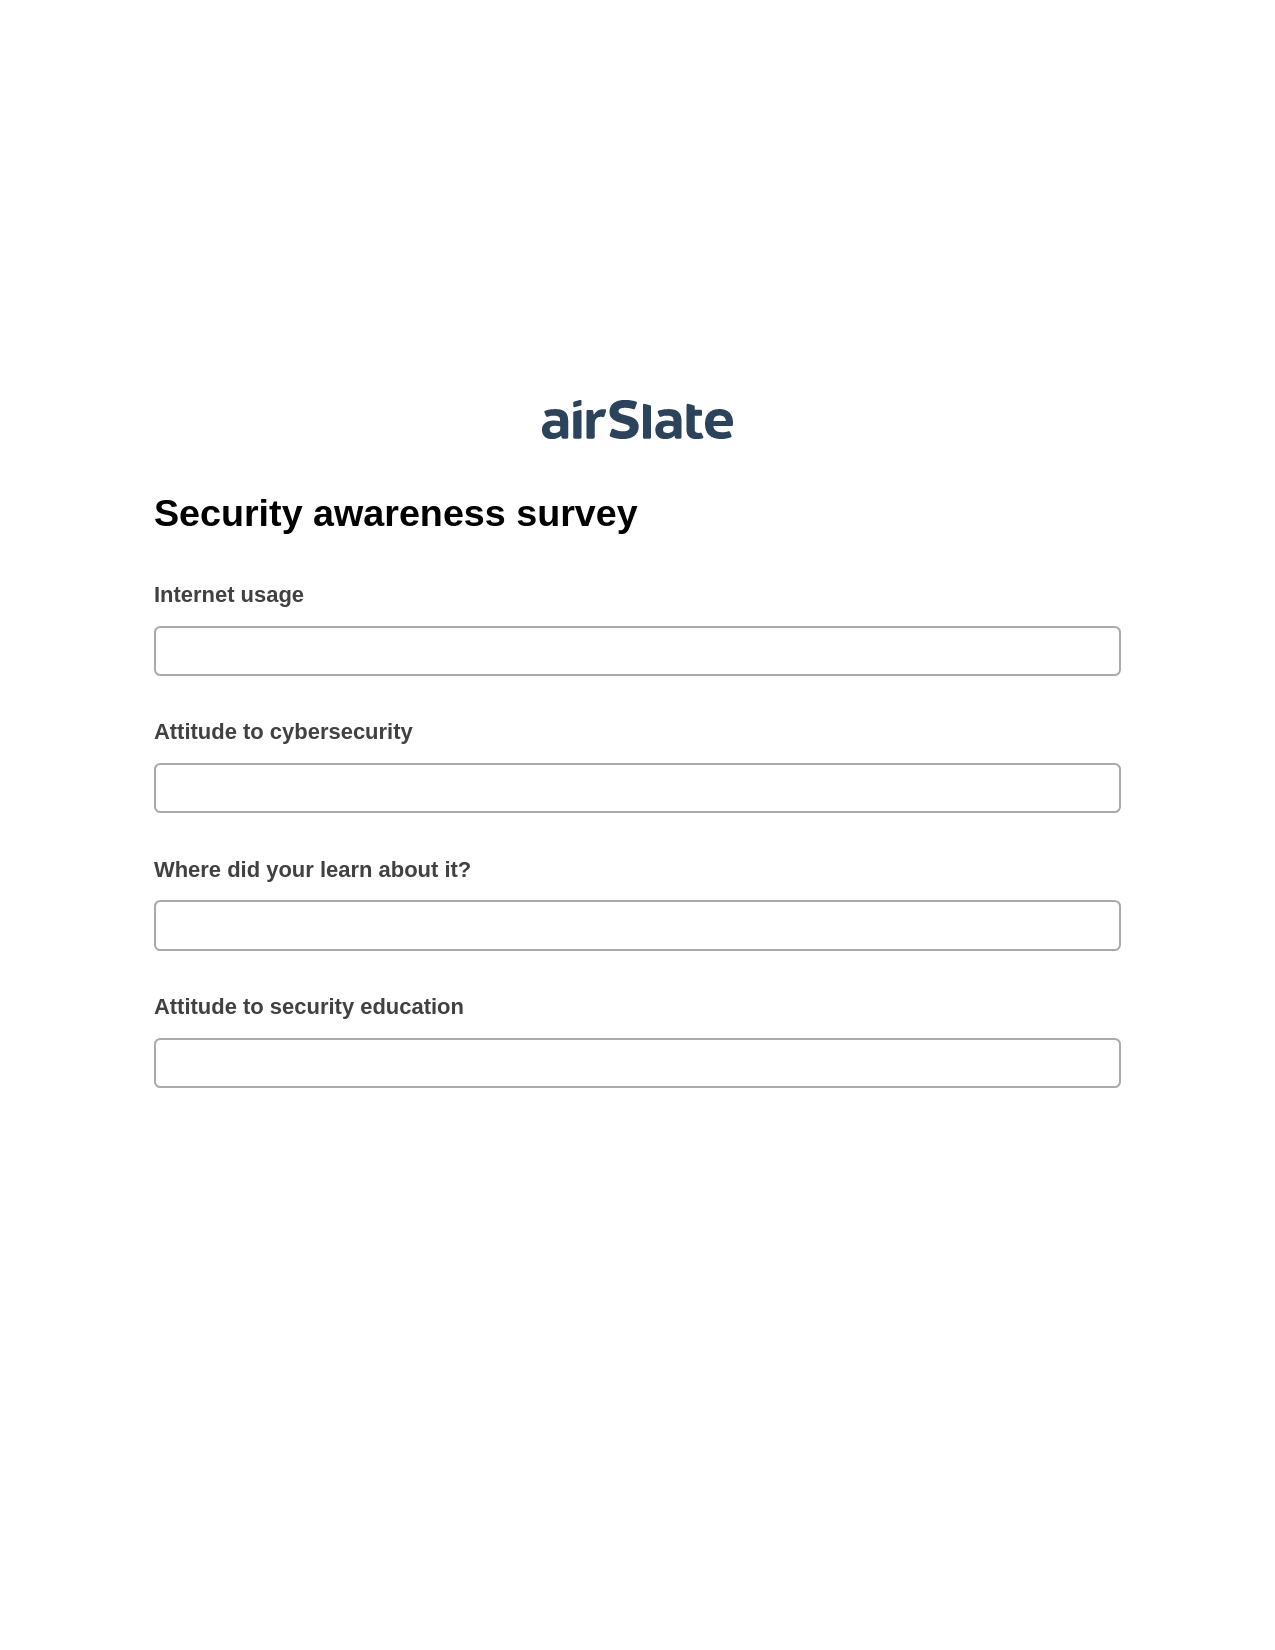 Security awareness survey Pre-fill from another Slate Bot, SendGrid send Campaign bot, Slack Two-Way Binding Bot